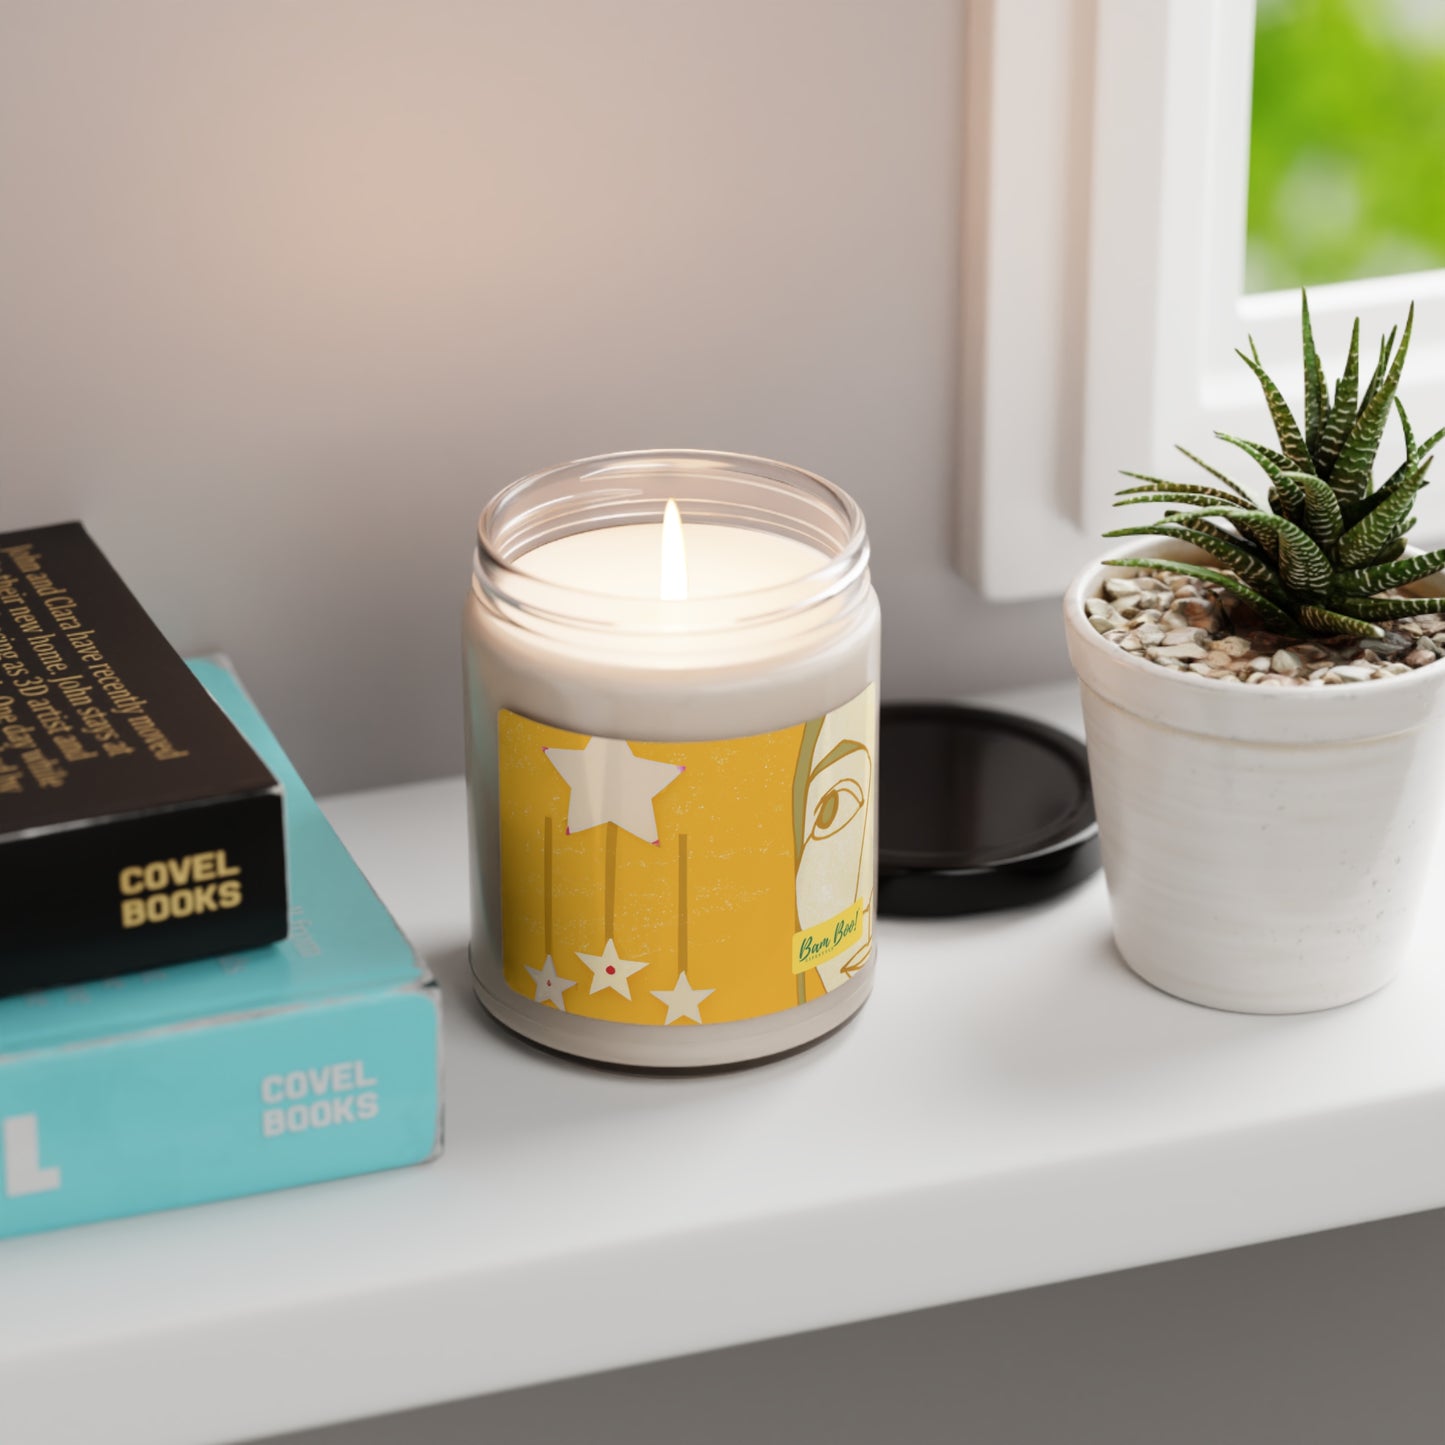 "Memories in Motion." - Bam Boo! Lifestyle Eco-friendly Soy Candle